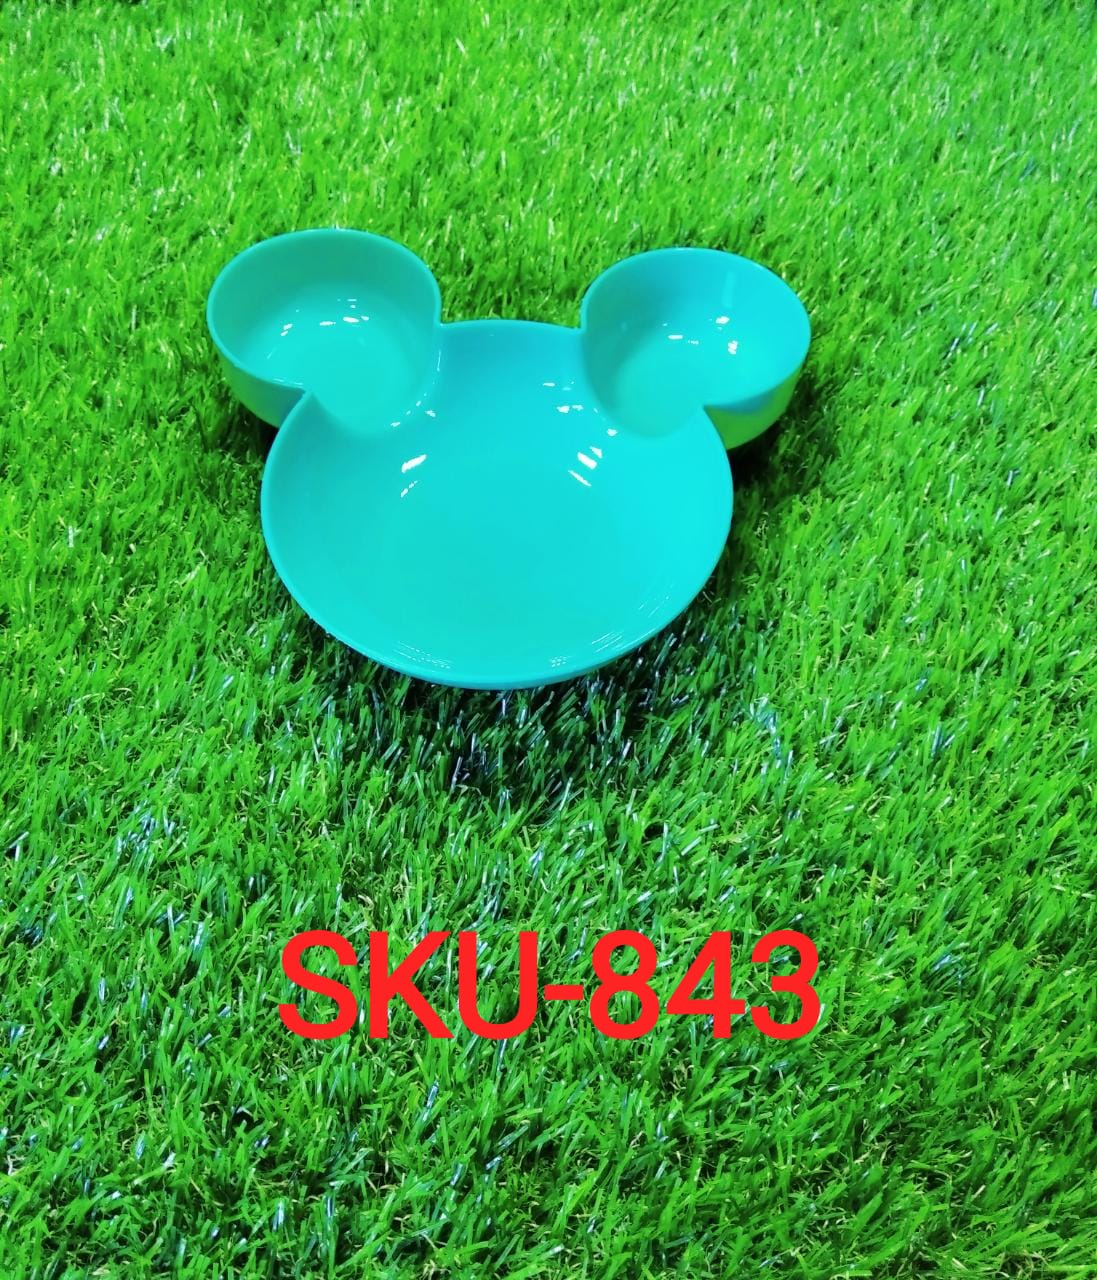 Mickey Shaped Kids/Snack Serving Sectioned Plate 